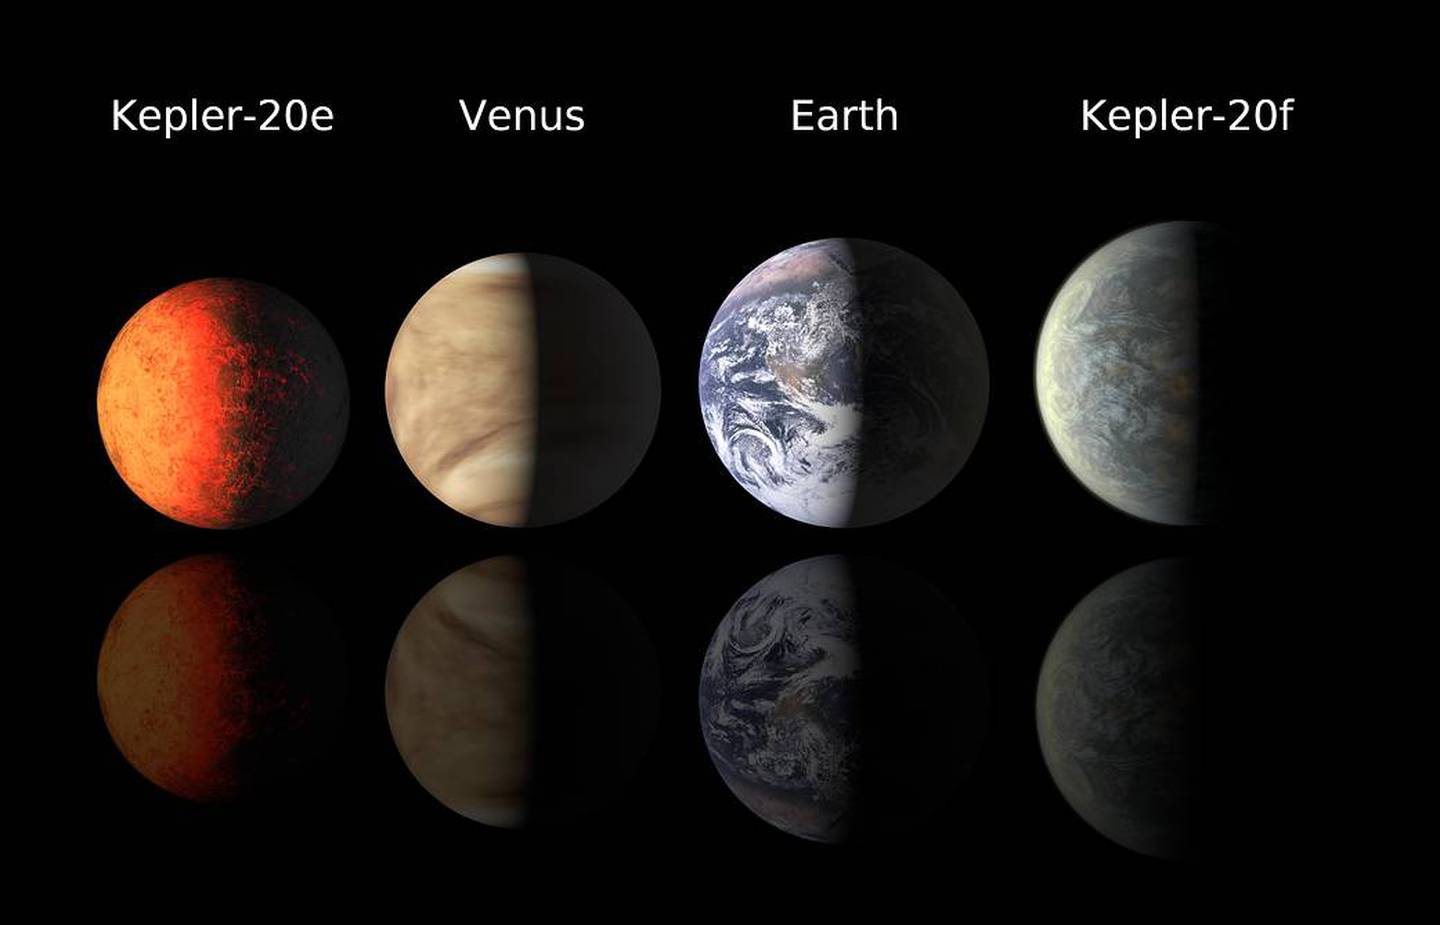 The Kepler-20e and Kepler-20f size compared with Venus and Earth. Courtesy: Nasa